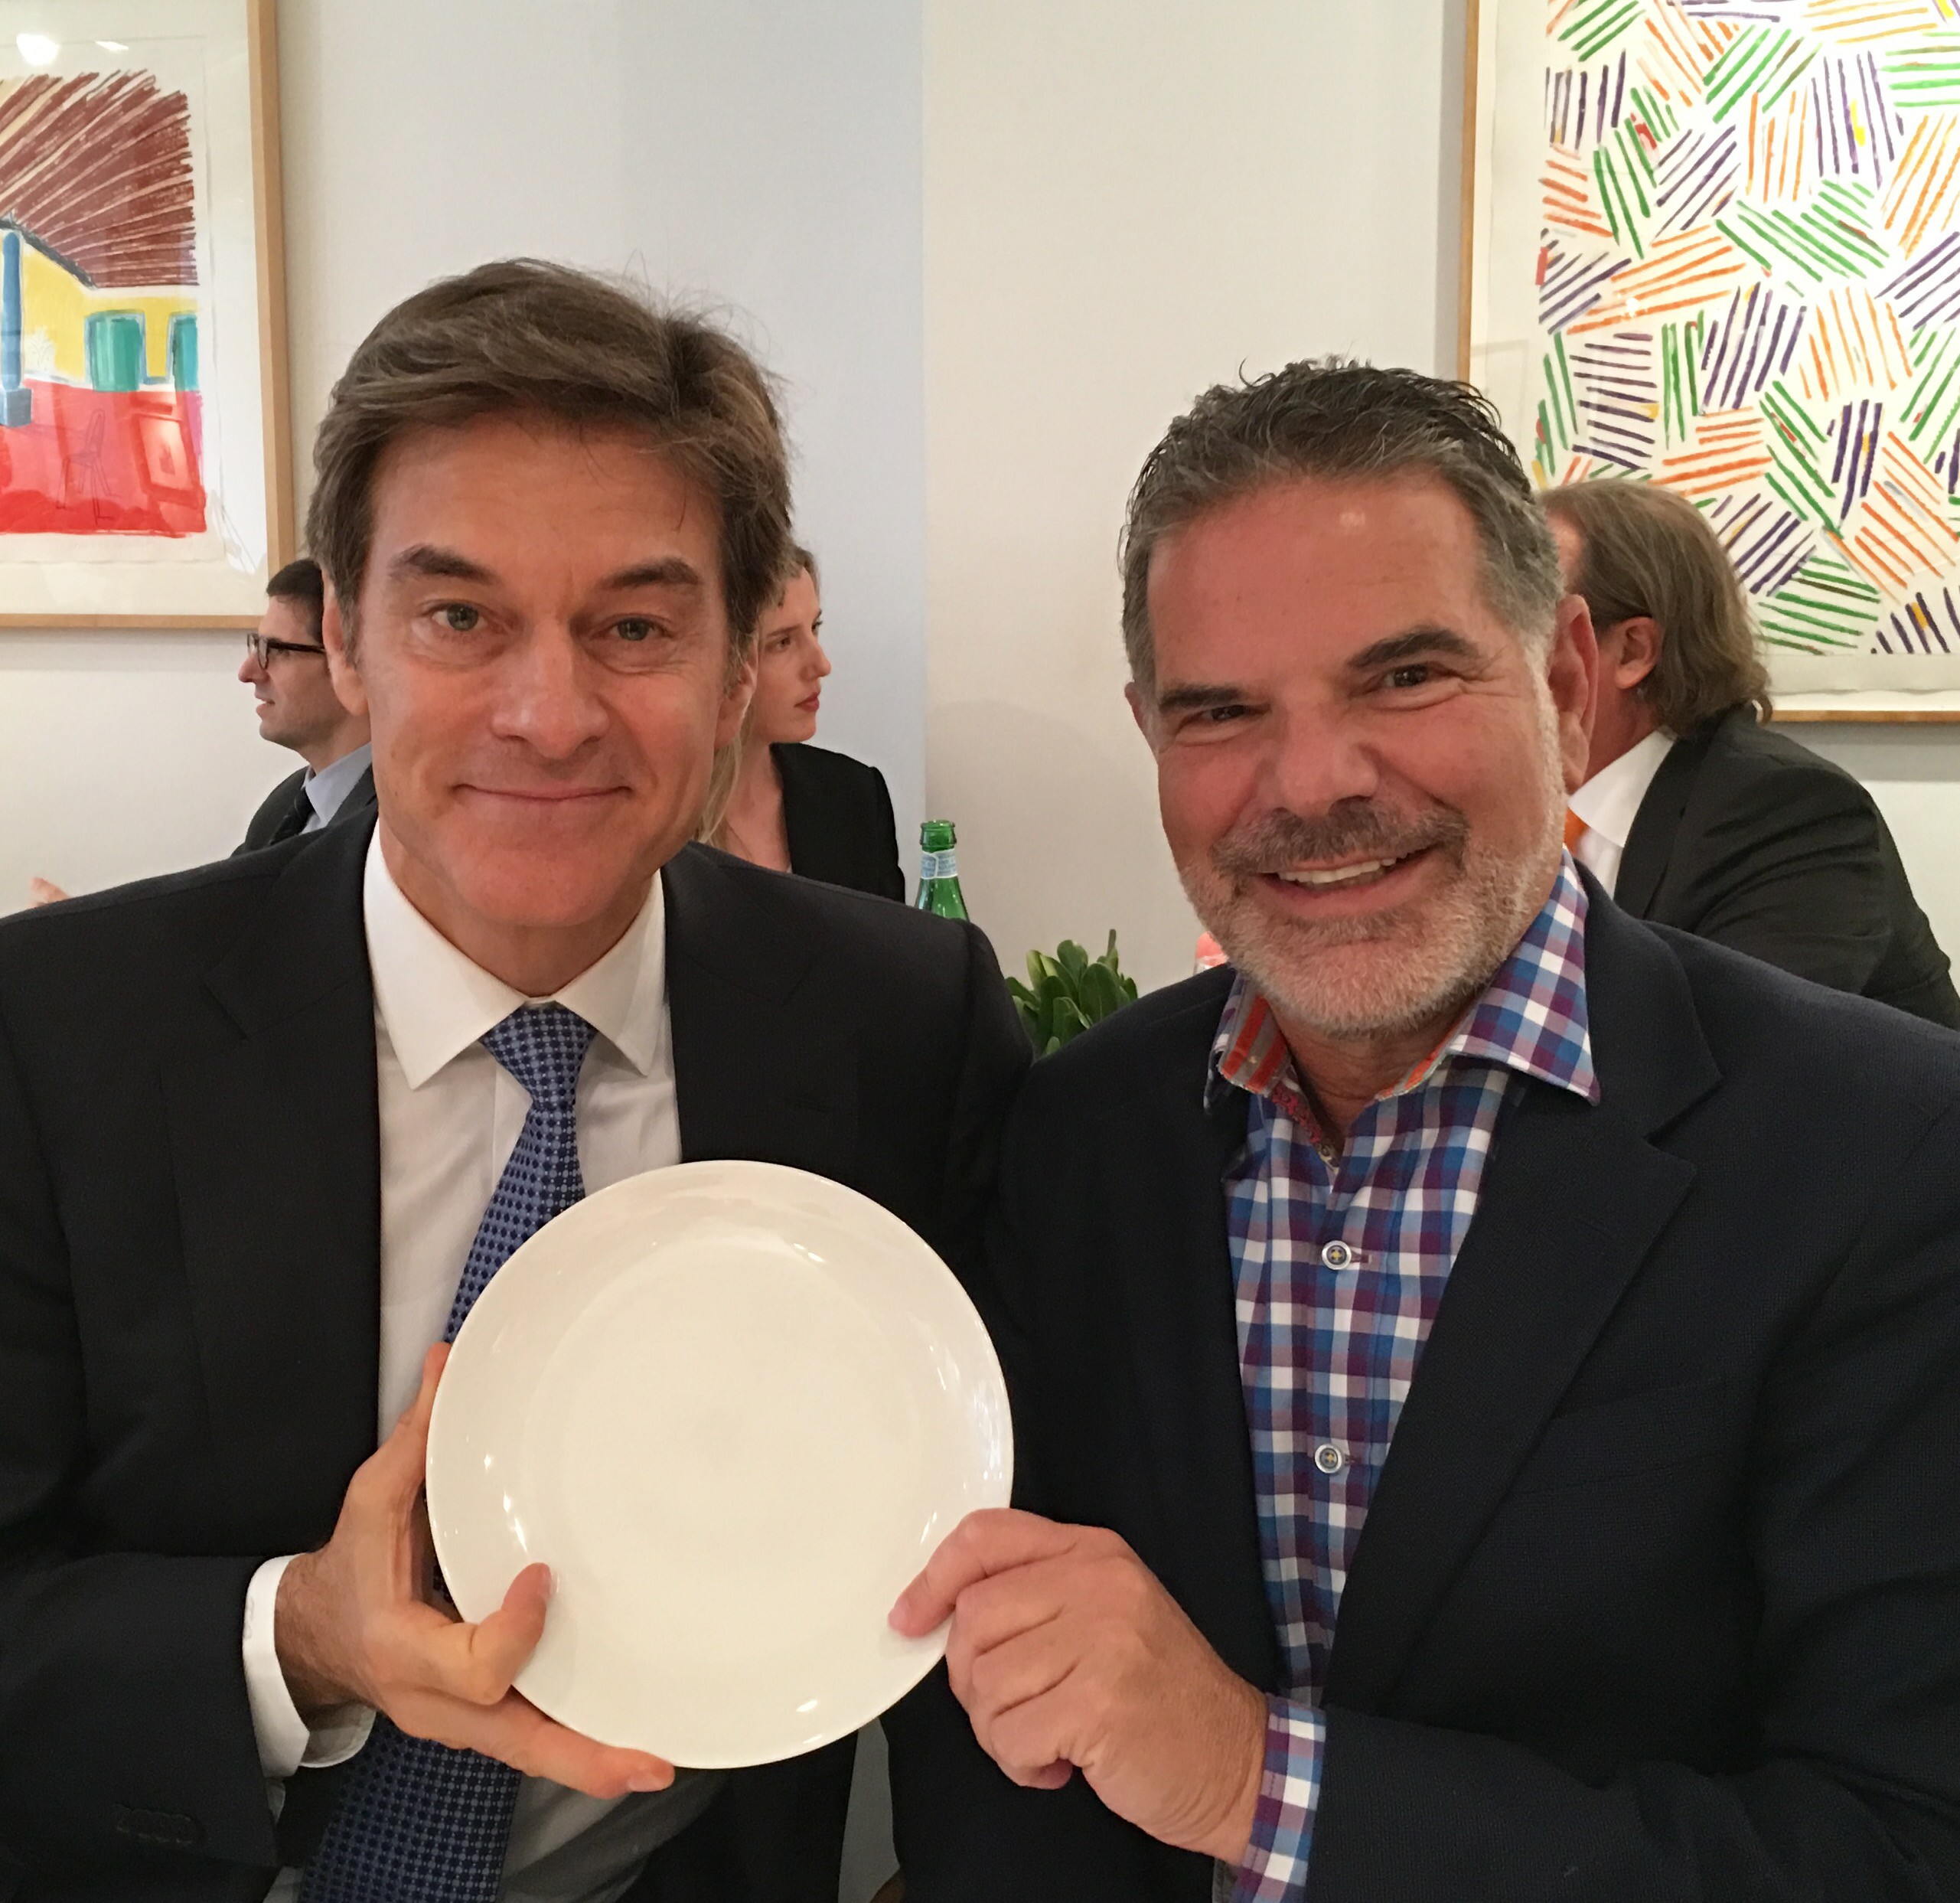 Cover image for  article: Lunch at Michael’s with Dr. Oz